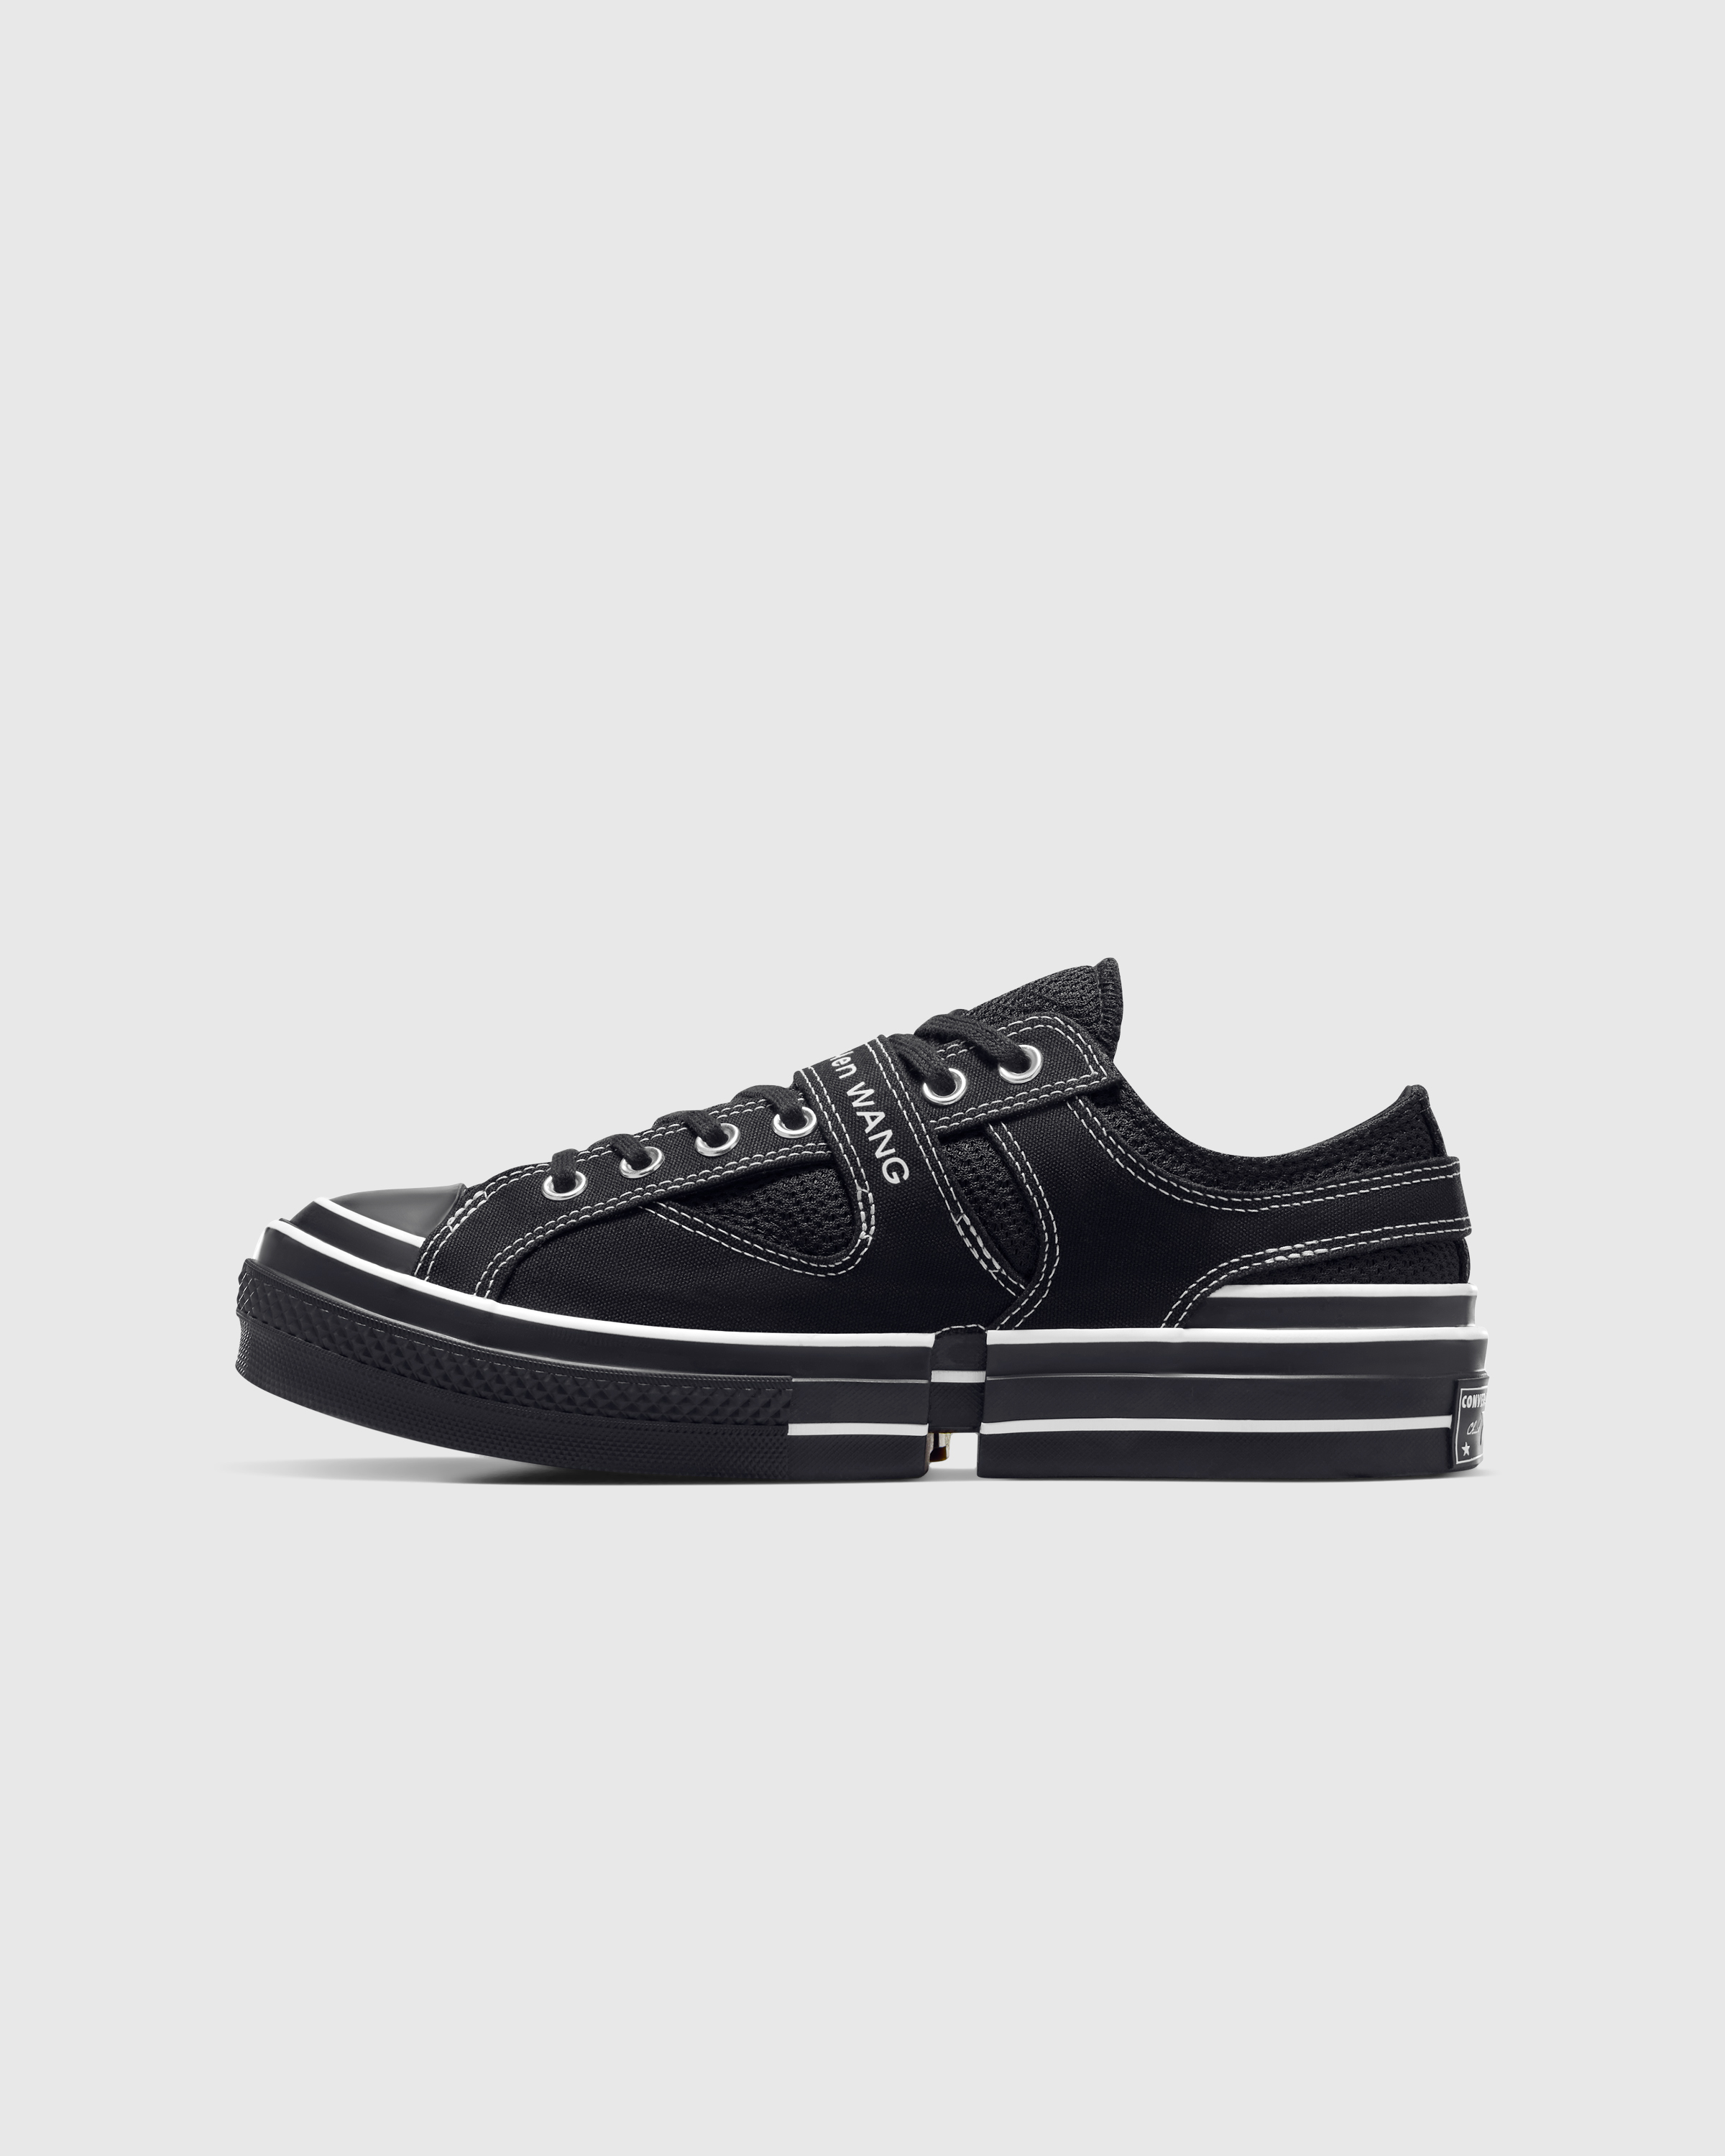 Feng Chen Wang x Converse – 2-in-1 Chuck 70 Black/Egret/Black - Low Top Sneakers - Black - Image 2